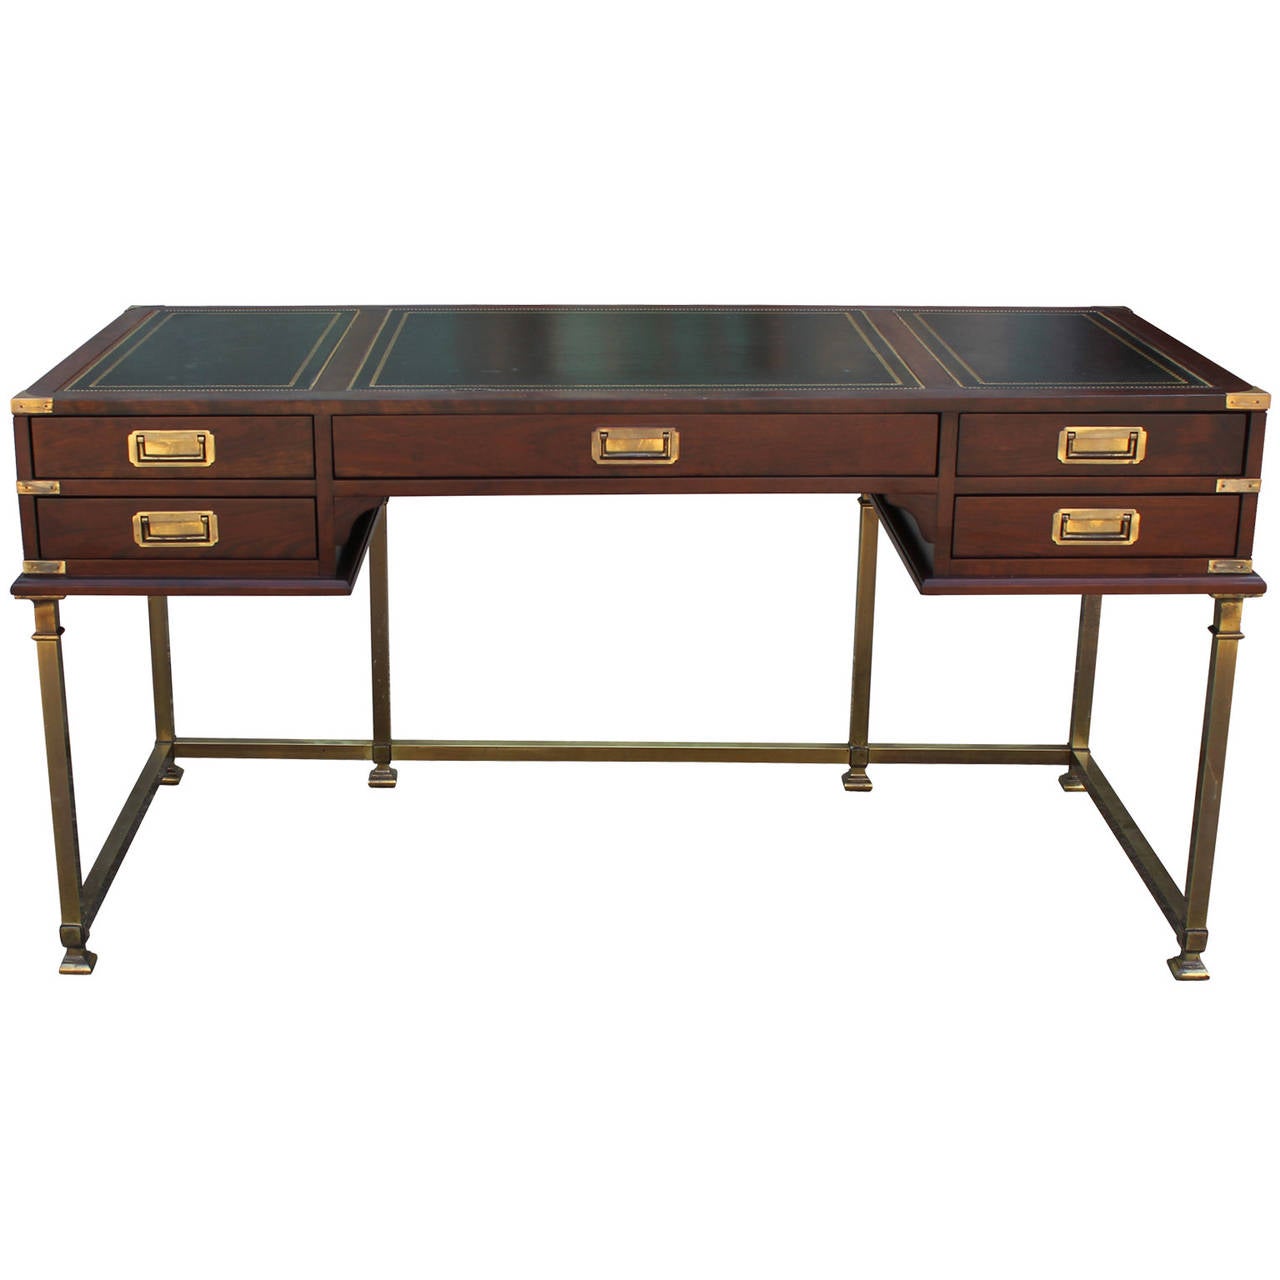 Fabulous campaign style desk by Sligh-Lowry. Desk rests upon a brass base which complements the brass hardware and accents. Desk top is covered in a gold detailed black leather. Leather shows some slight wear in spots but is overall in great shape.